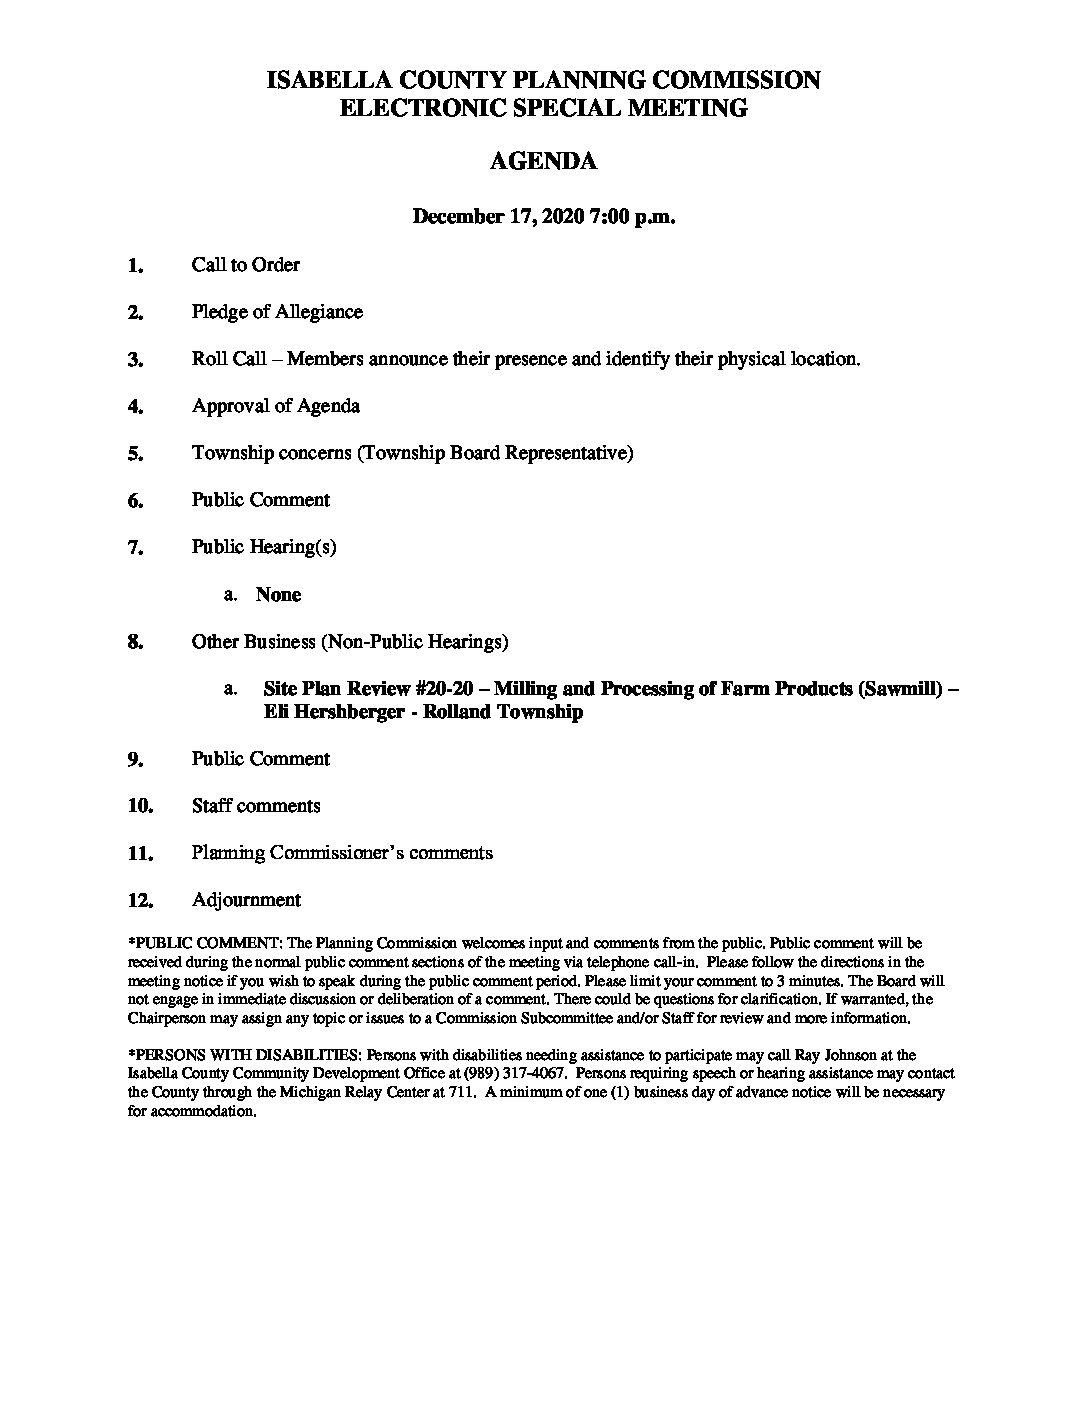 preview image of first page December 17, 2020 Agenda